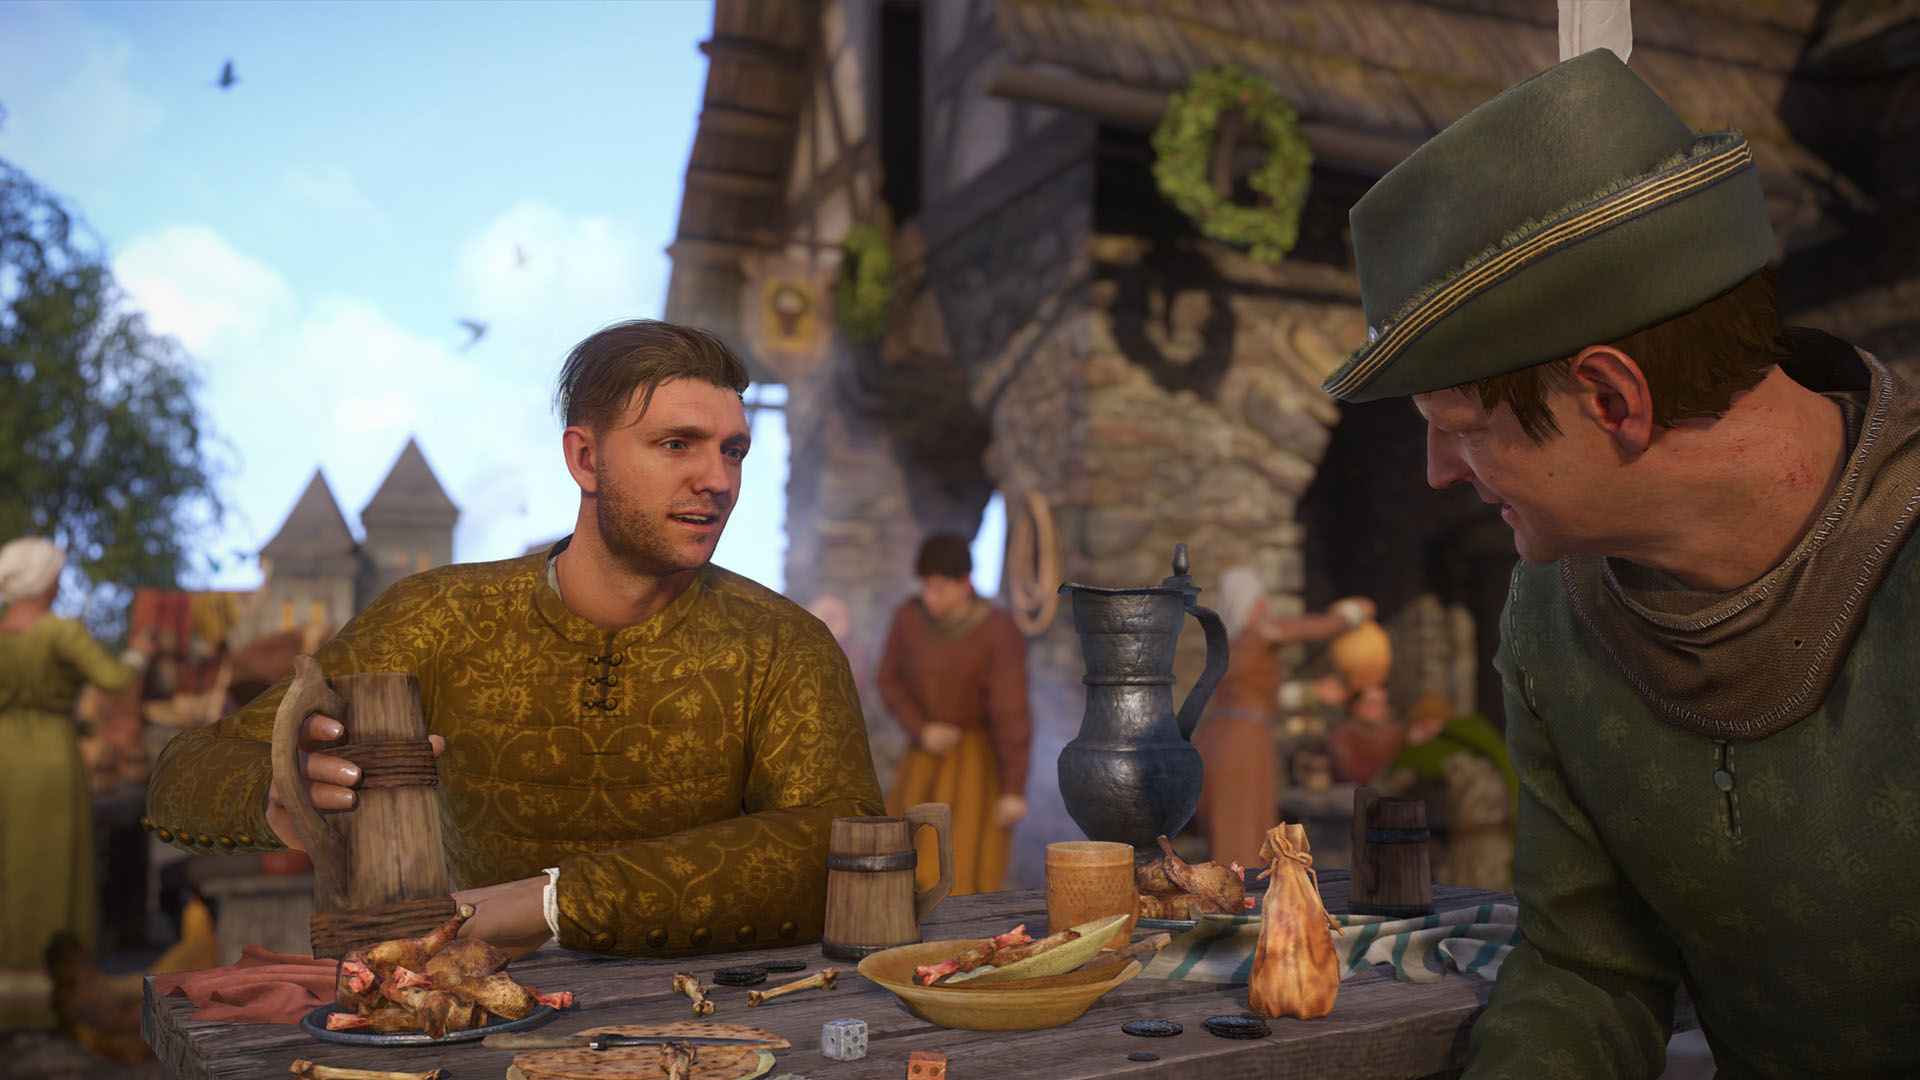 Kingdom Come Deliverance DLC Coming Next Week To PS4 And Xbox One